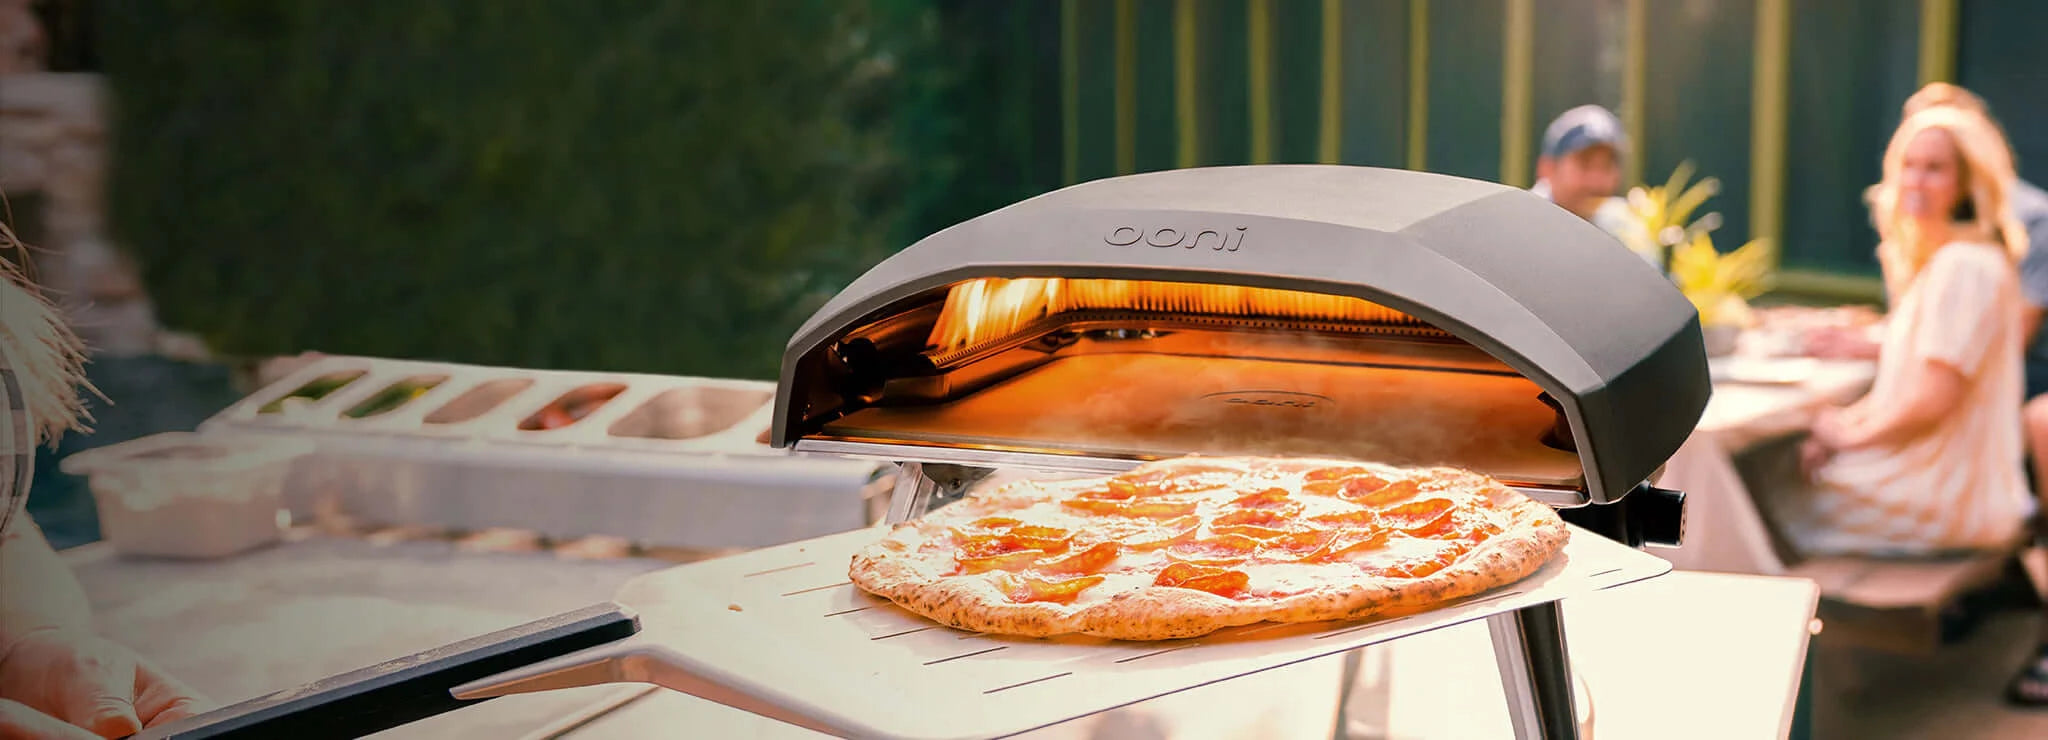 Ooni - Infrared Pizza Oven Thermometer